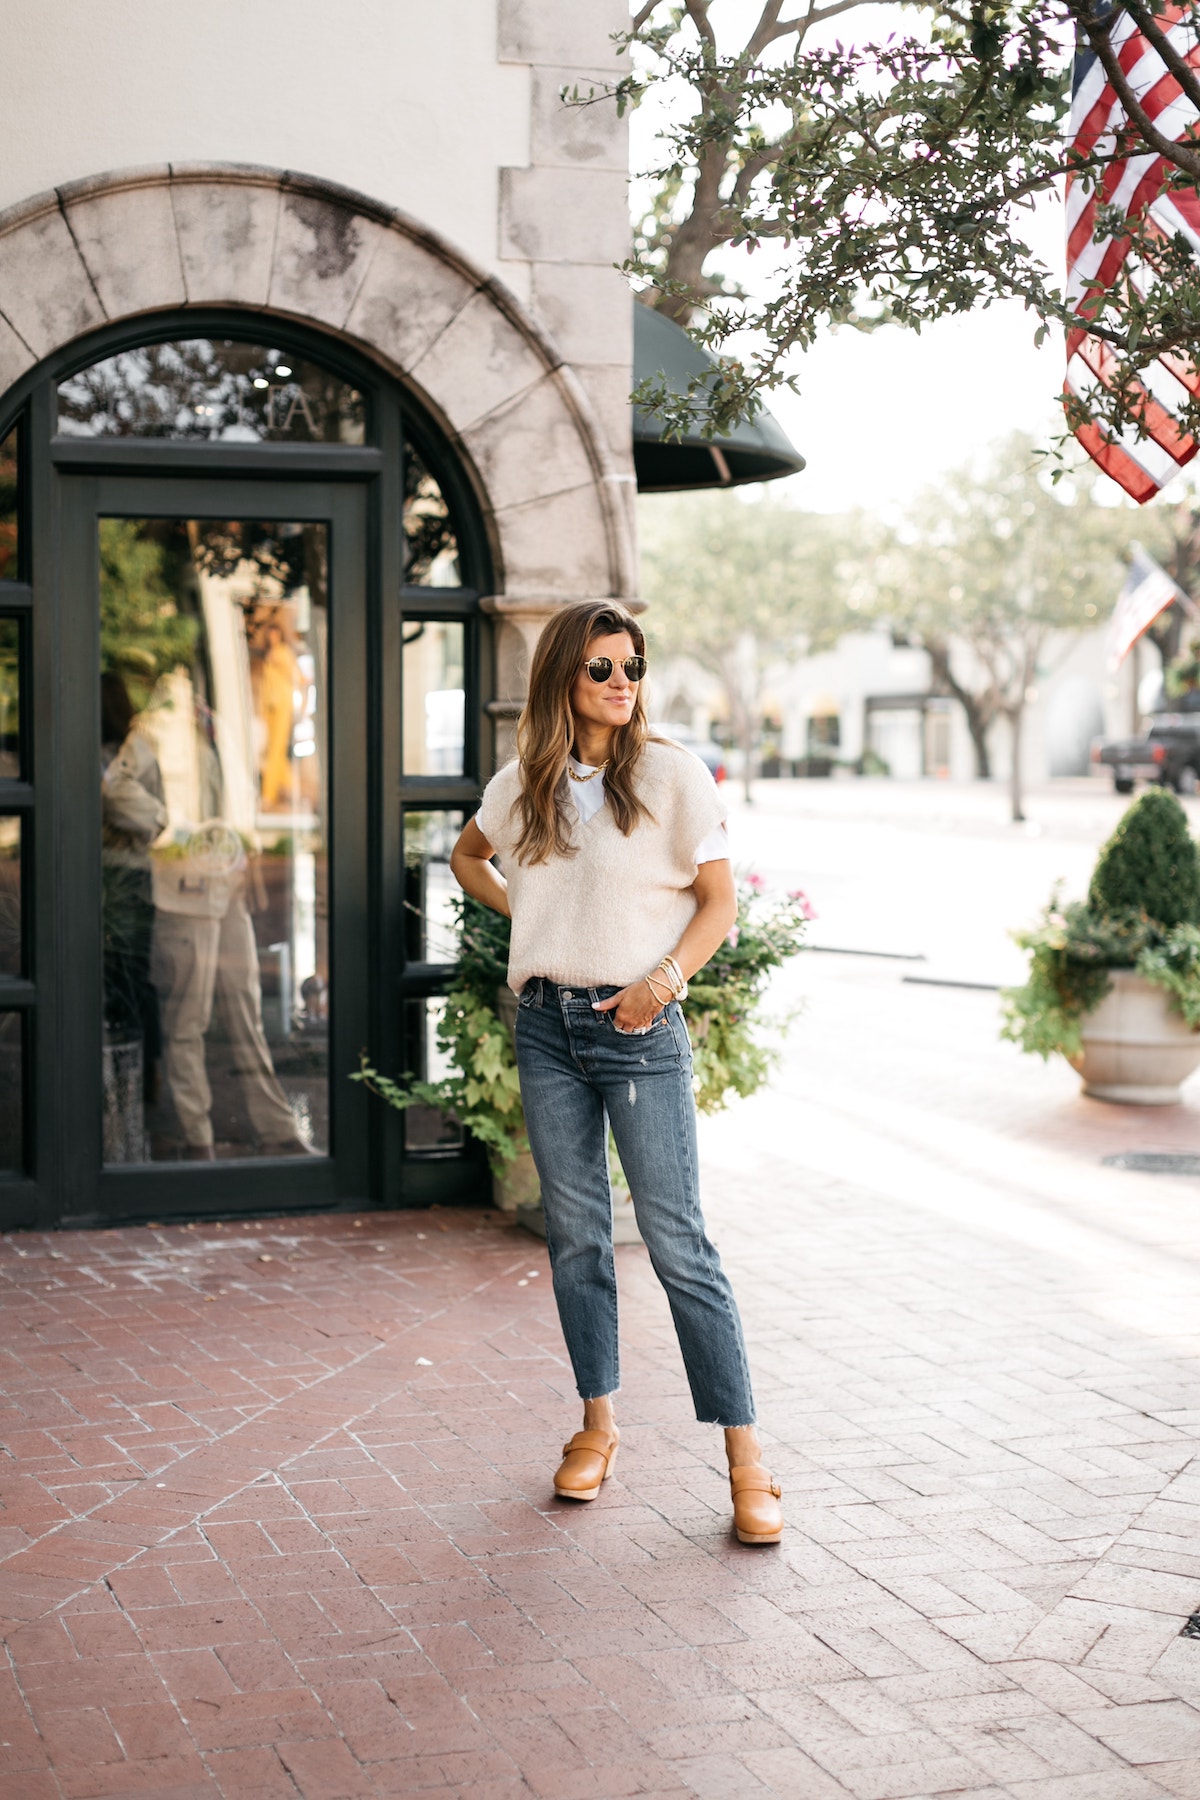 Brighton Butler wearing sweater vest layered over white tee, Levi's denim, clogs, sweater vest trend